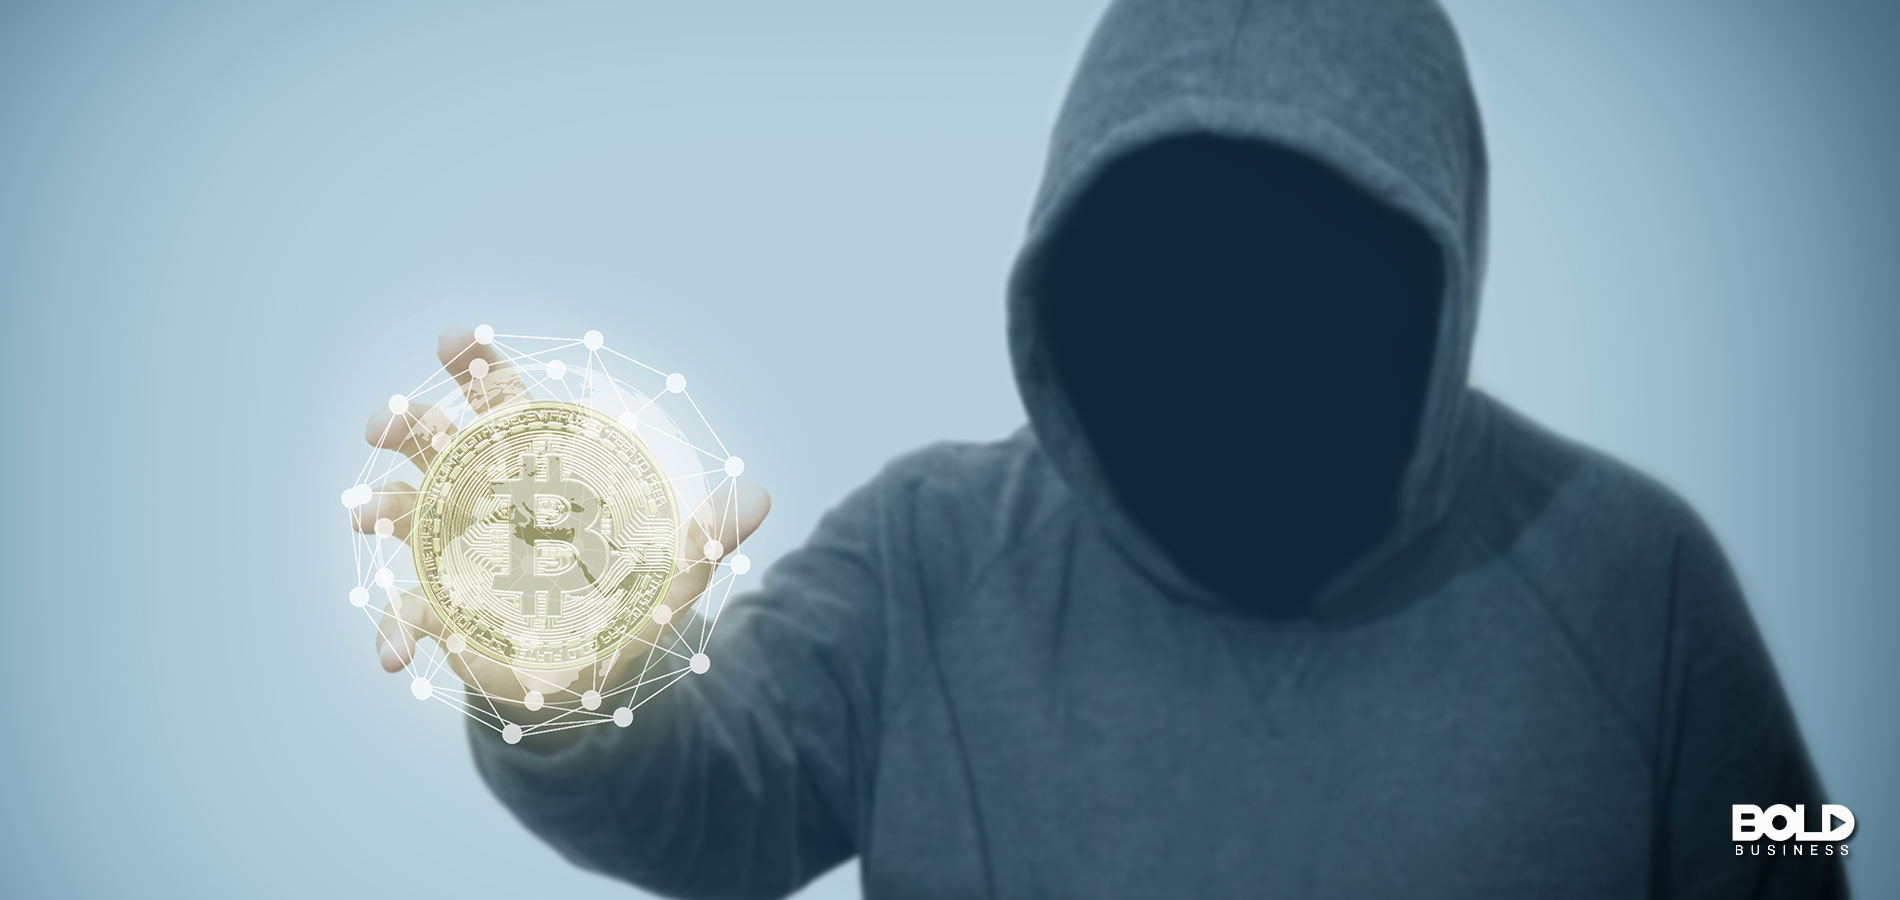 The Real Threat to Cryptocurrency: State-Sponsored Hackers